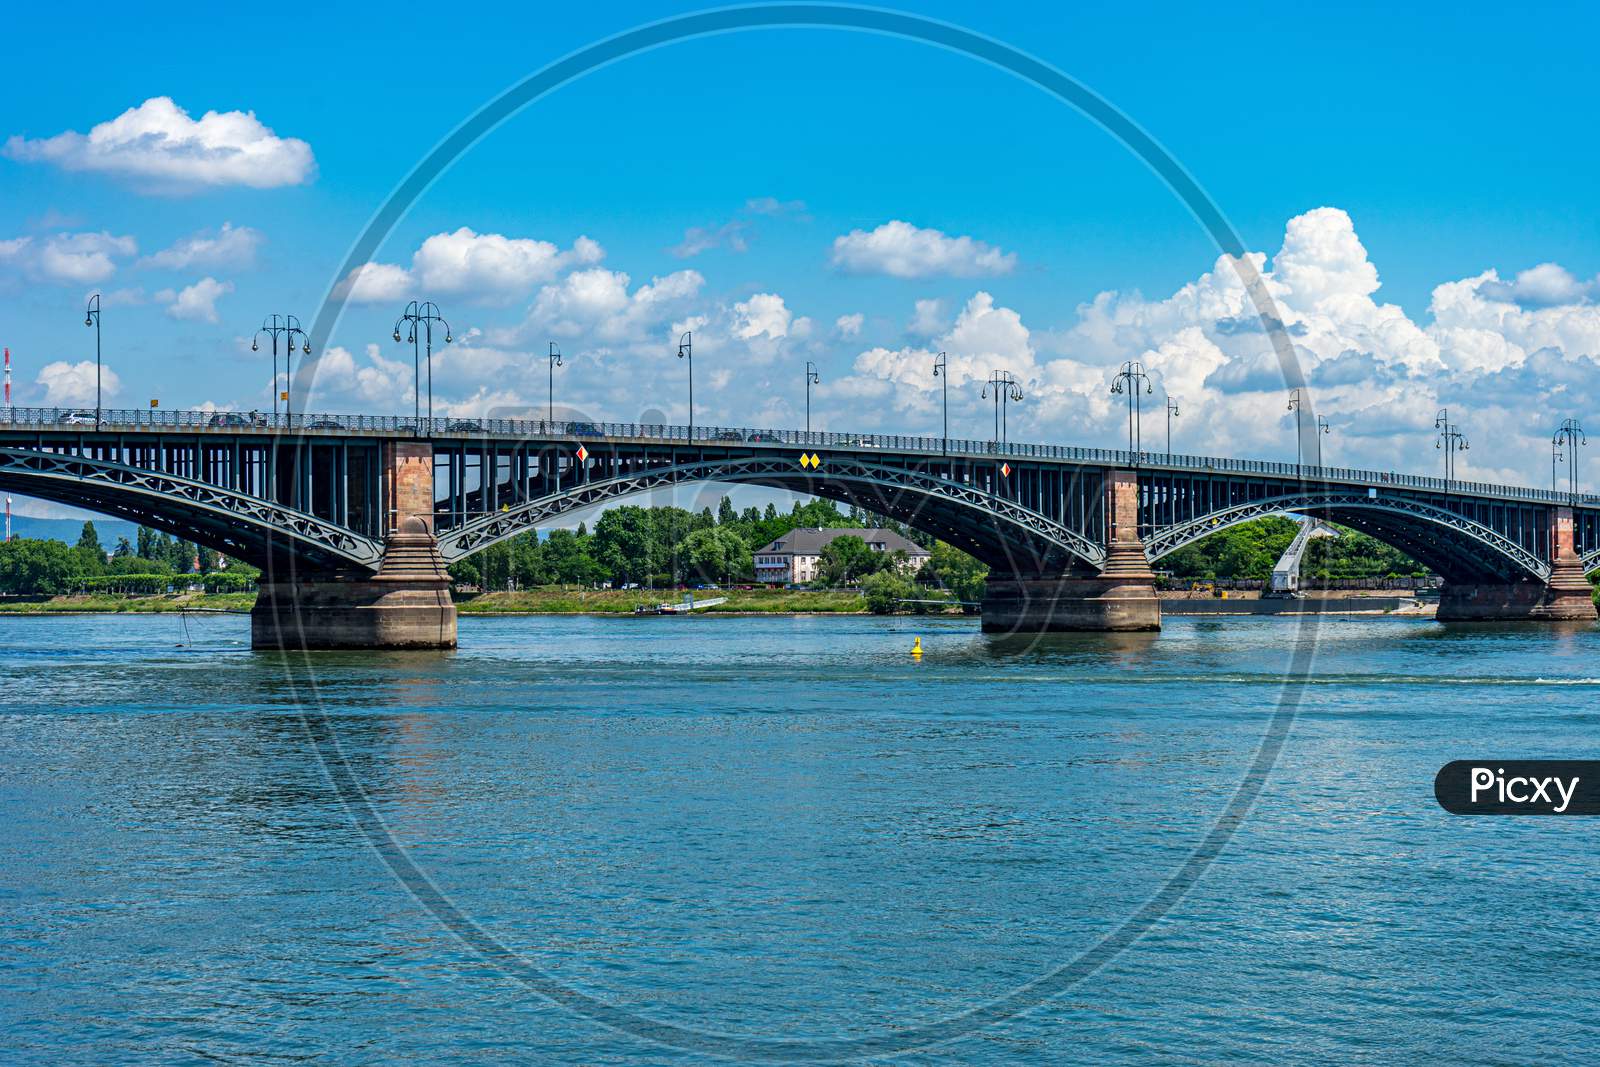 Germany, Heritage Site Mainz, A Train Crossing A Bridge Over A Body Of Water